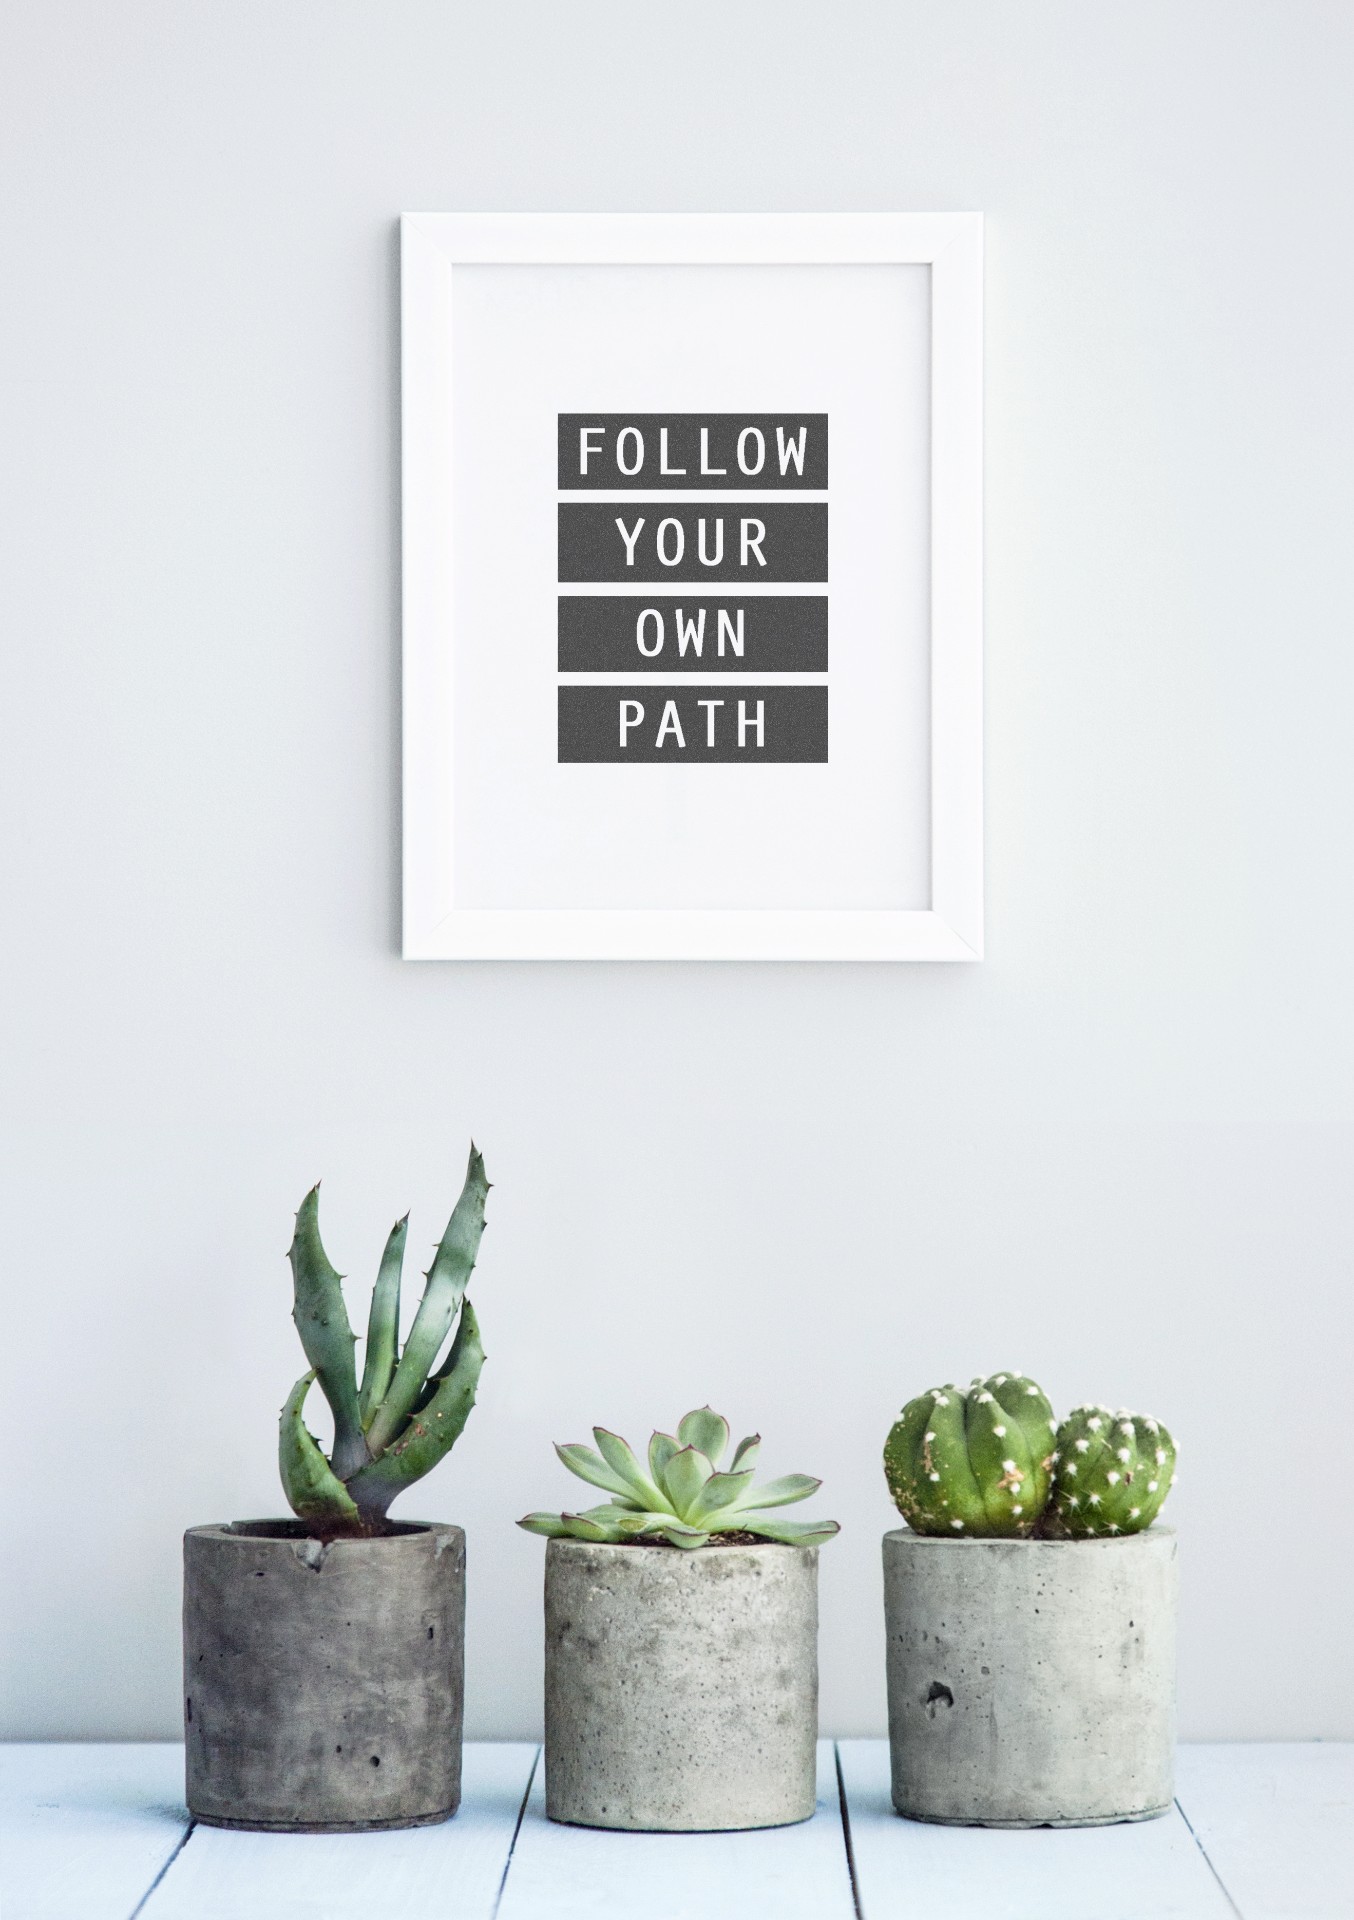 A wall art says, "Follow Your Own Path," and below are 3 succulents. This article covers the 6 benefits of growing succulents in your home.